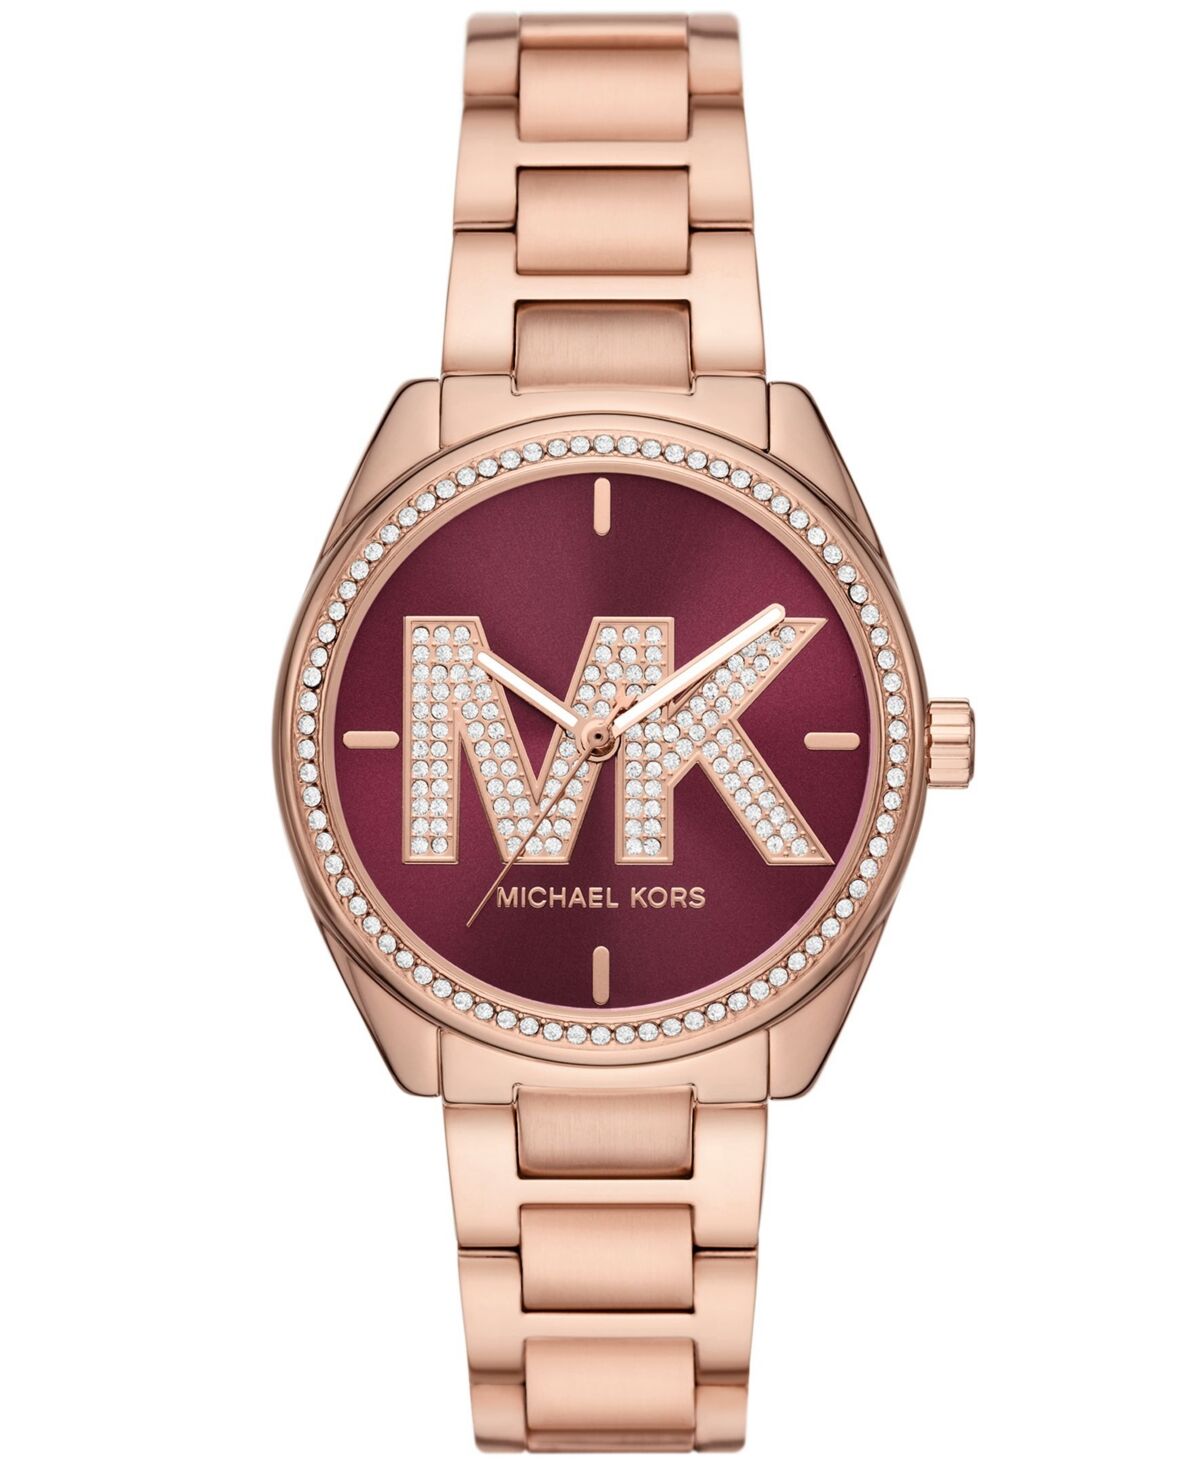 Michael Kors Women's Janelle Three-Hand Rose Gold-Tone Stainless Steel Watch 36mm - Rose Gold-Tone